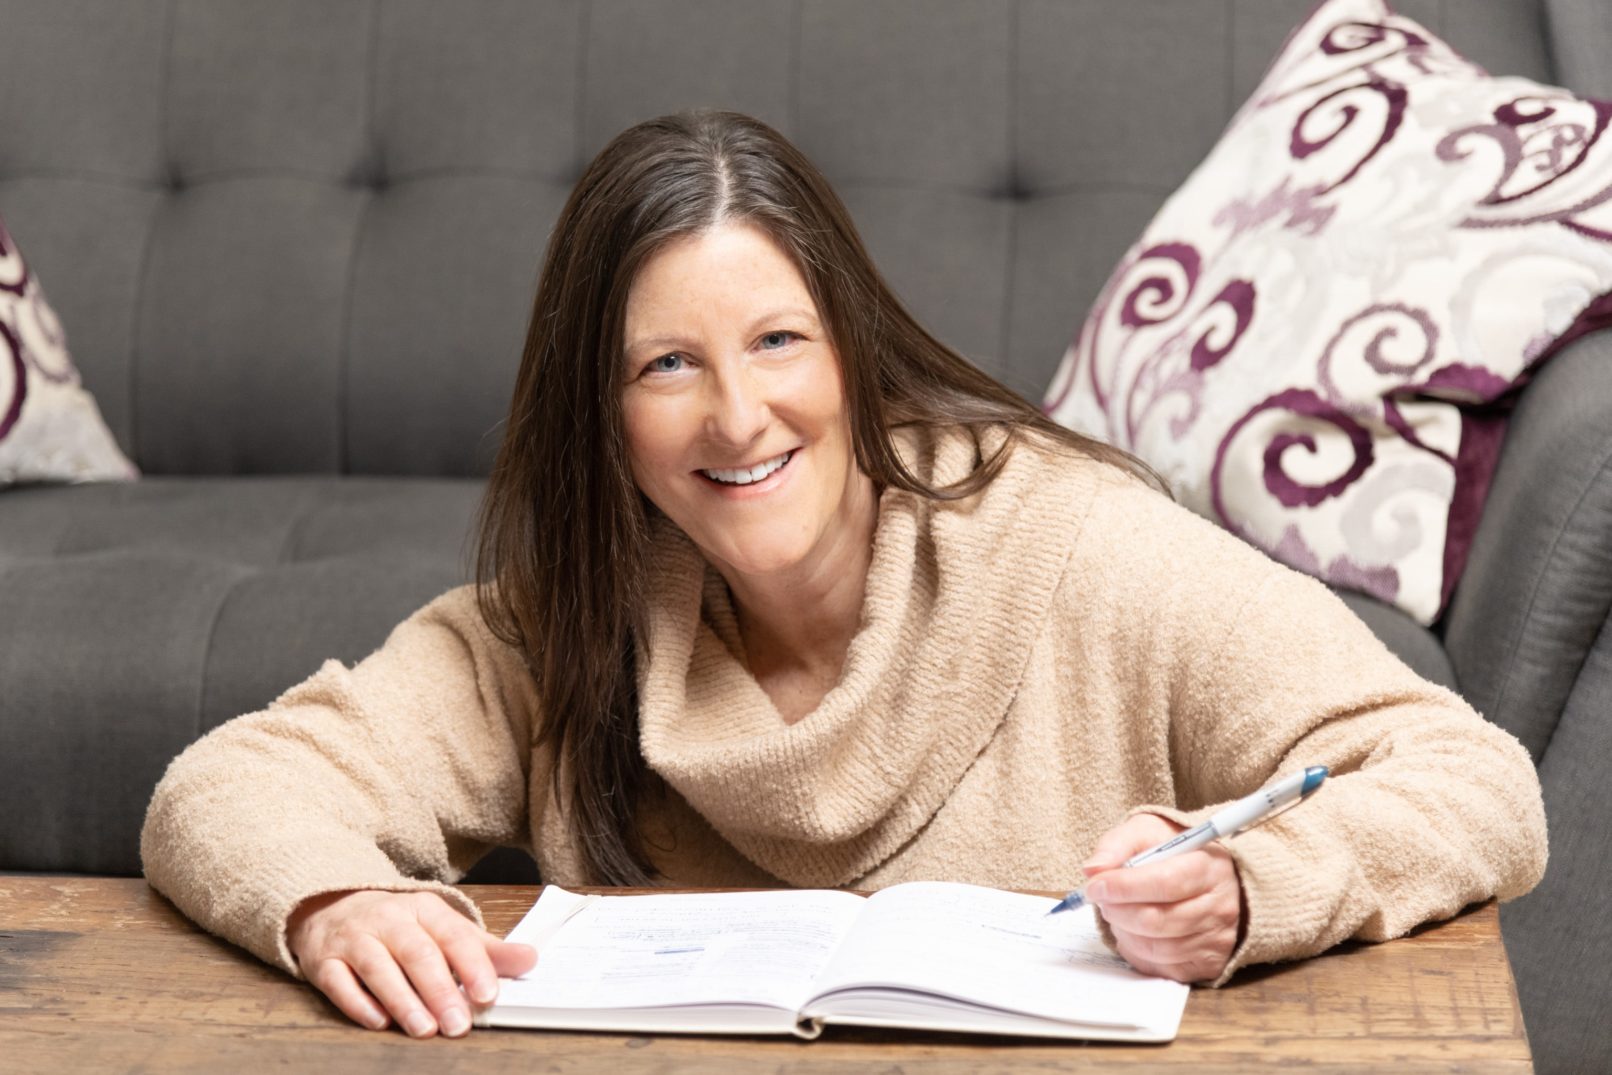 Portrait-Personal Branding photo of a woman smiling while sitting on floor at a coffee table writing in a book with a couch in the background.